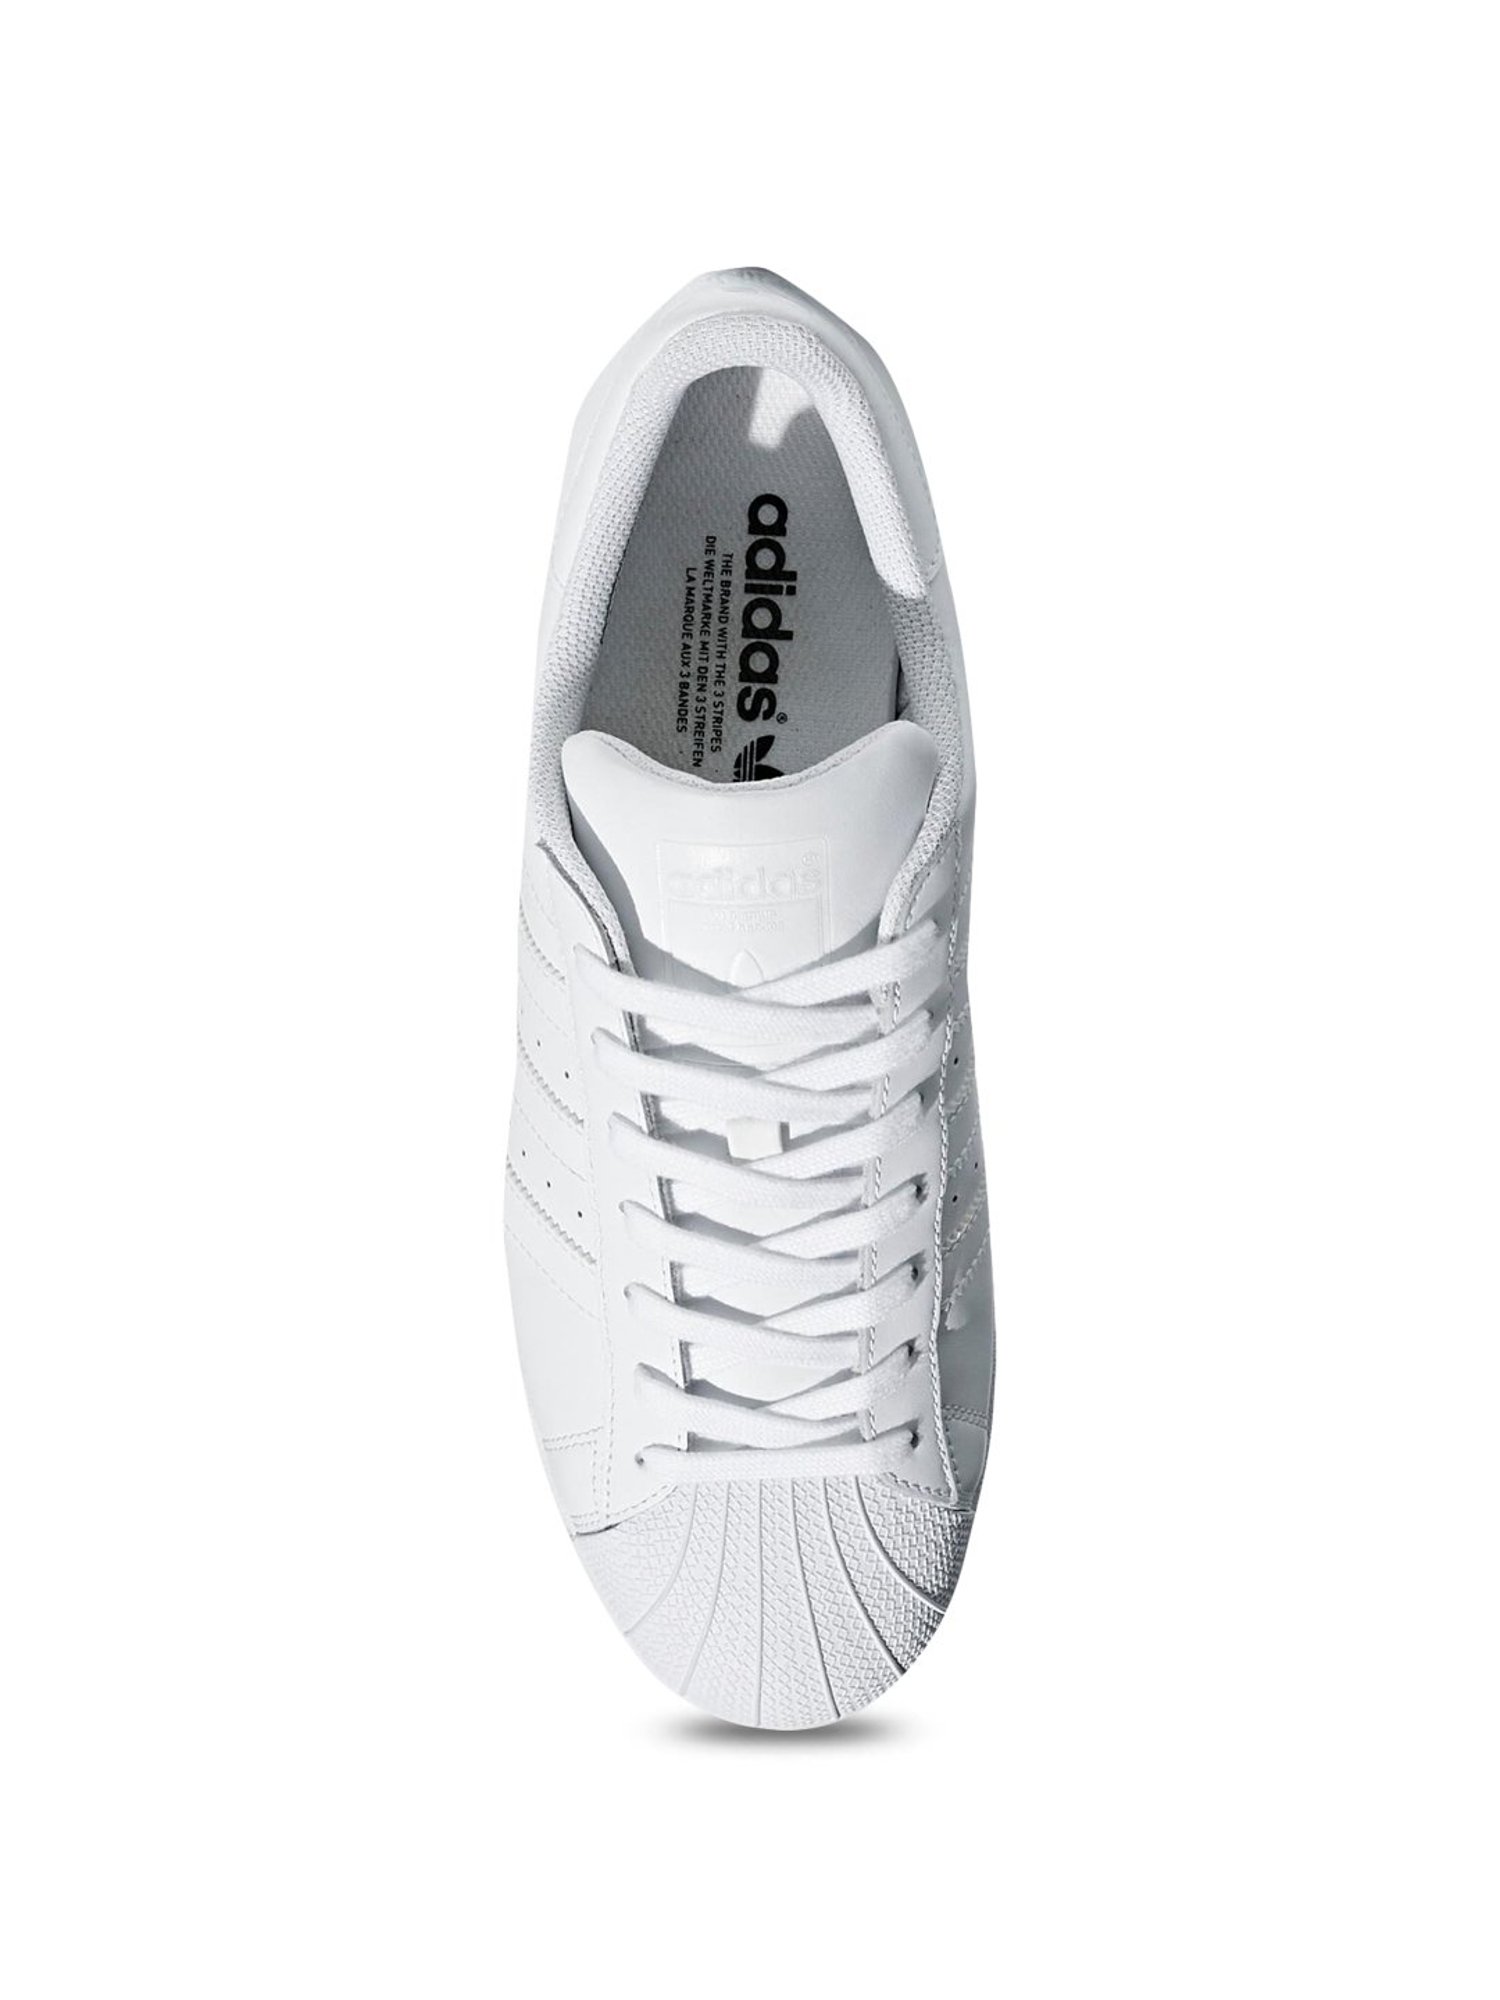 Adidas Superstar White Sneakers from 